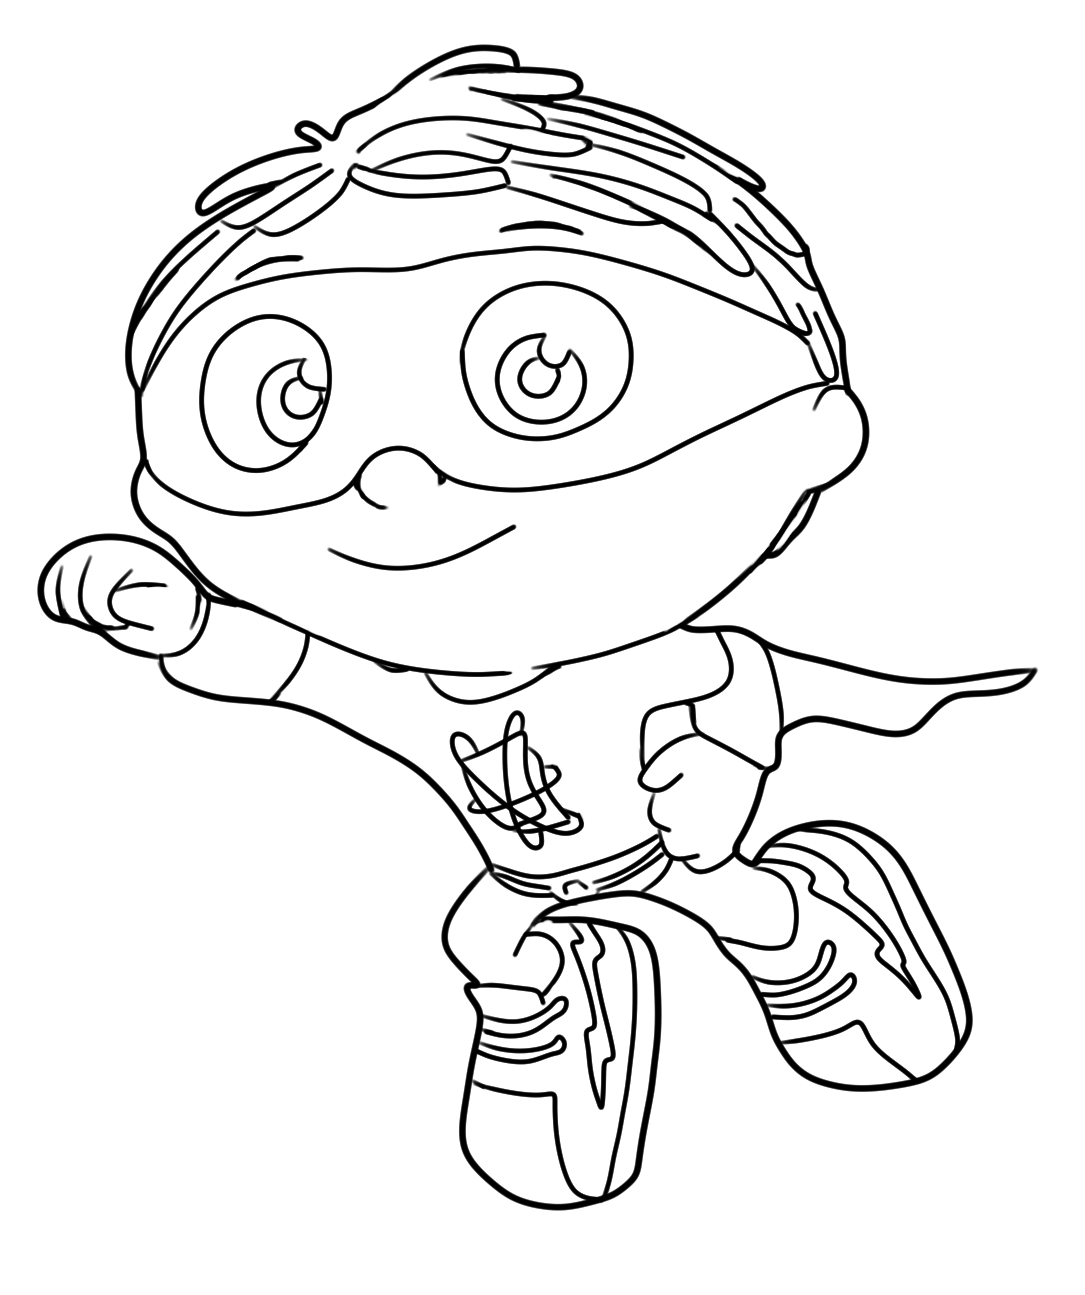 Super Why Coloring Pages Pdf For Children - 